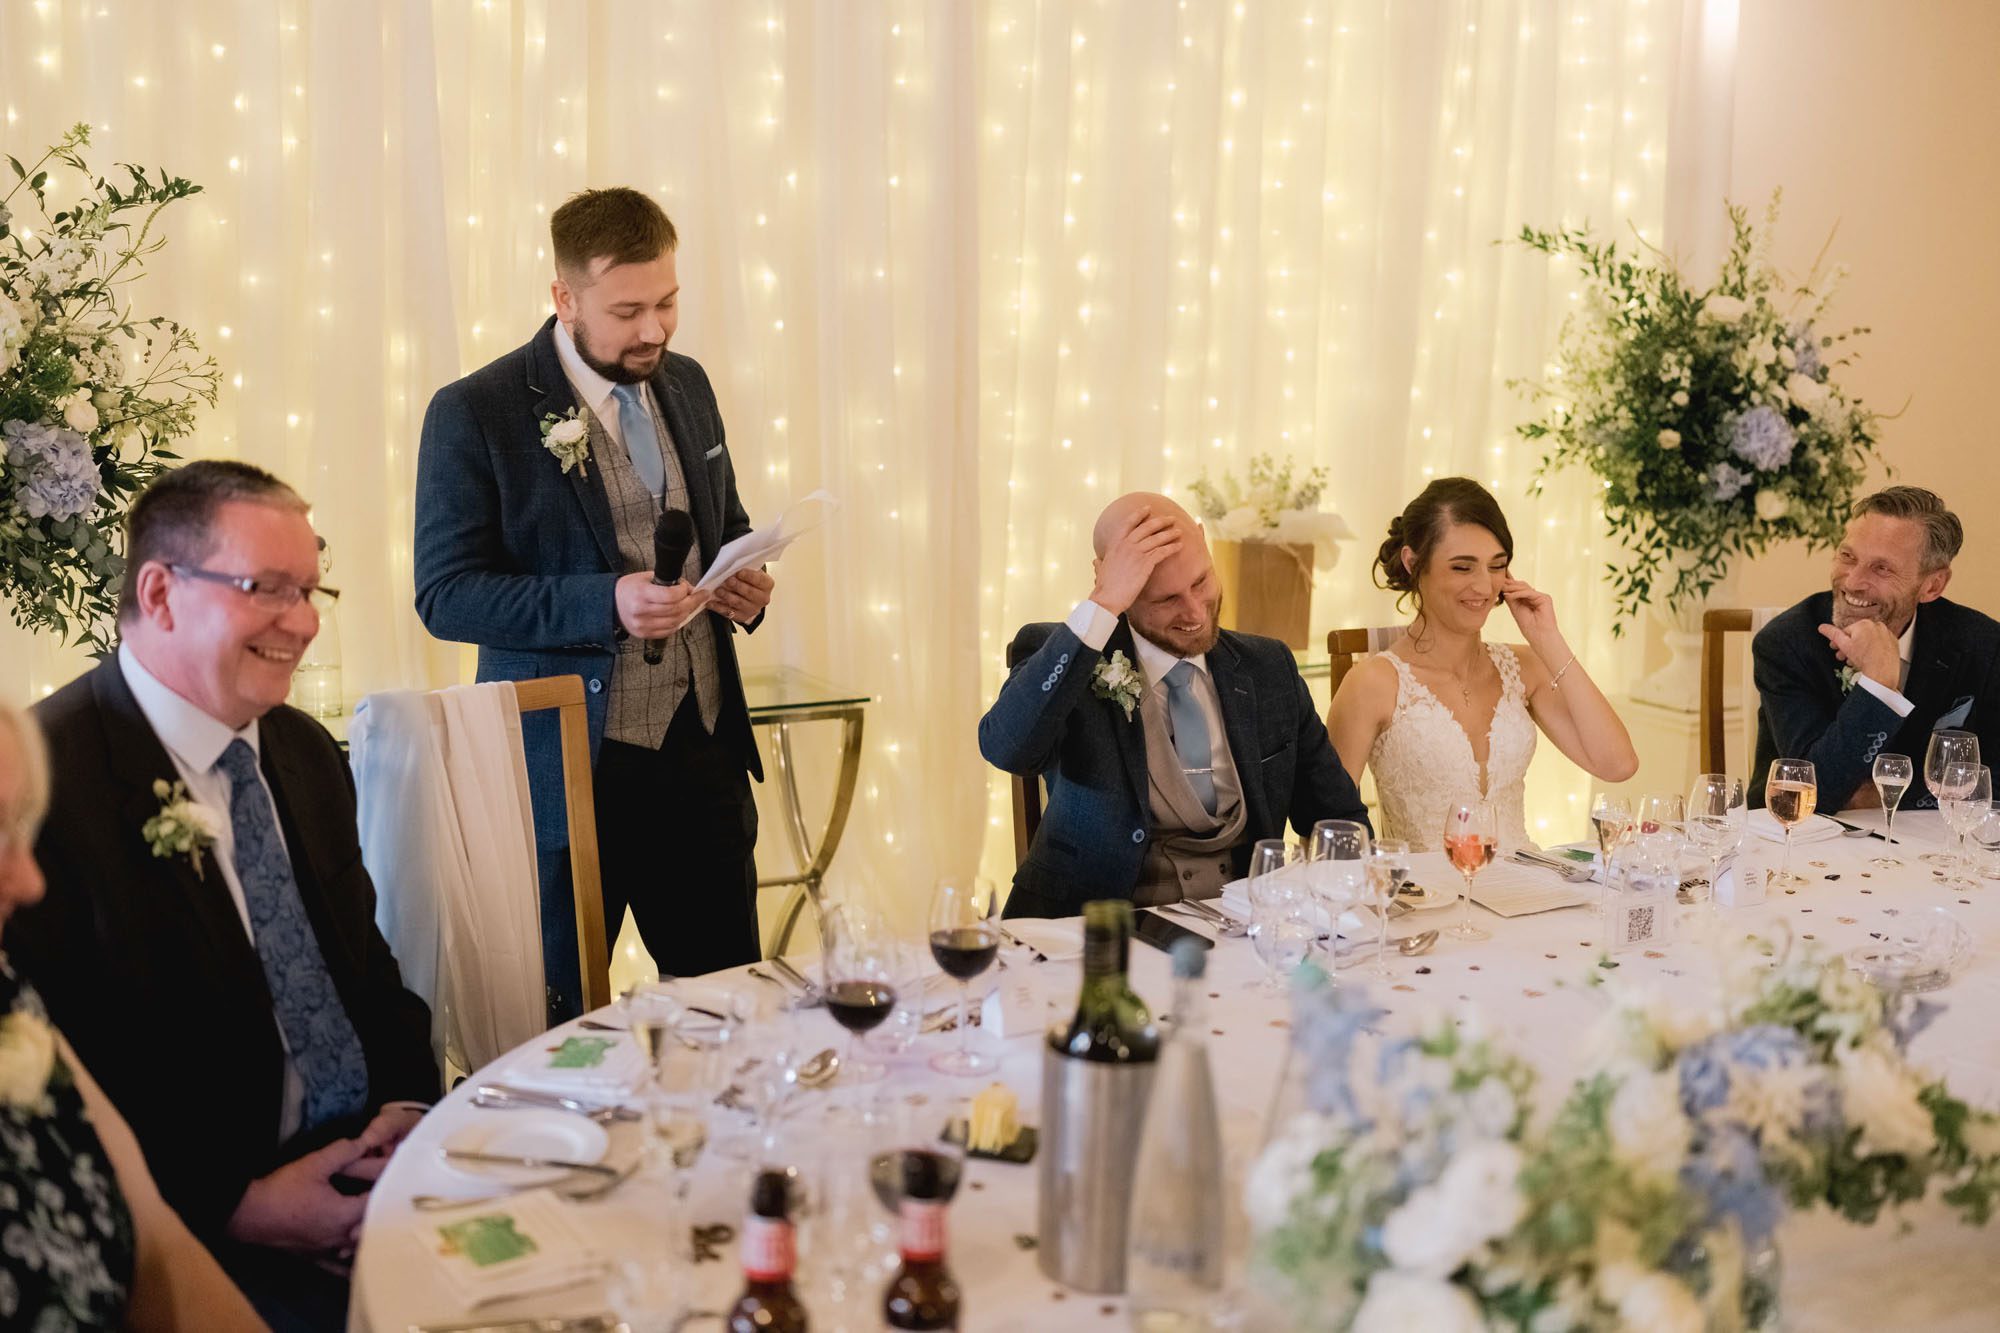 Best man delivers his speech at a wedding at Rivervale Barn in Hampshire.